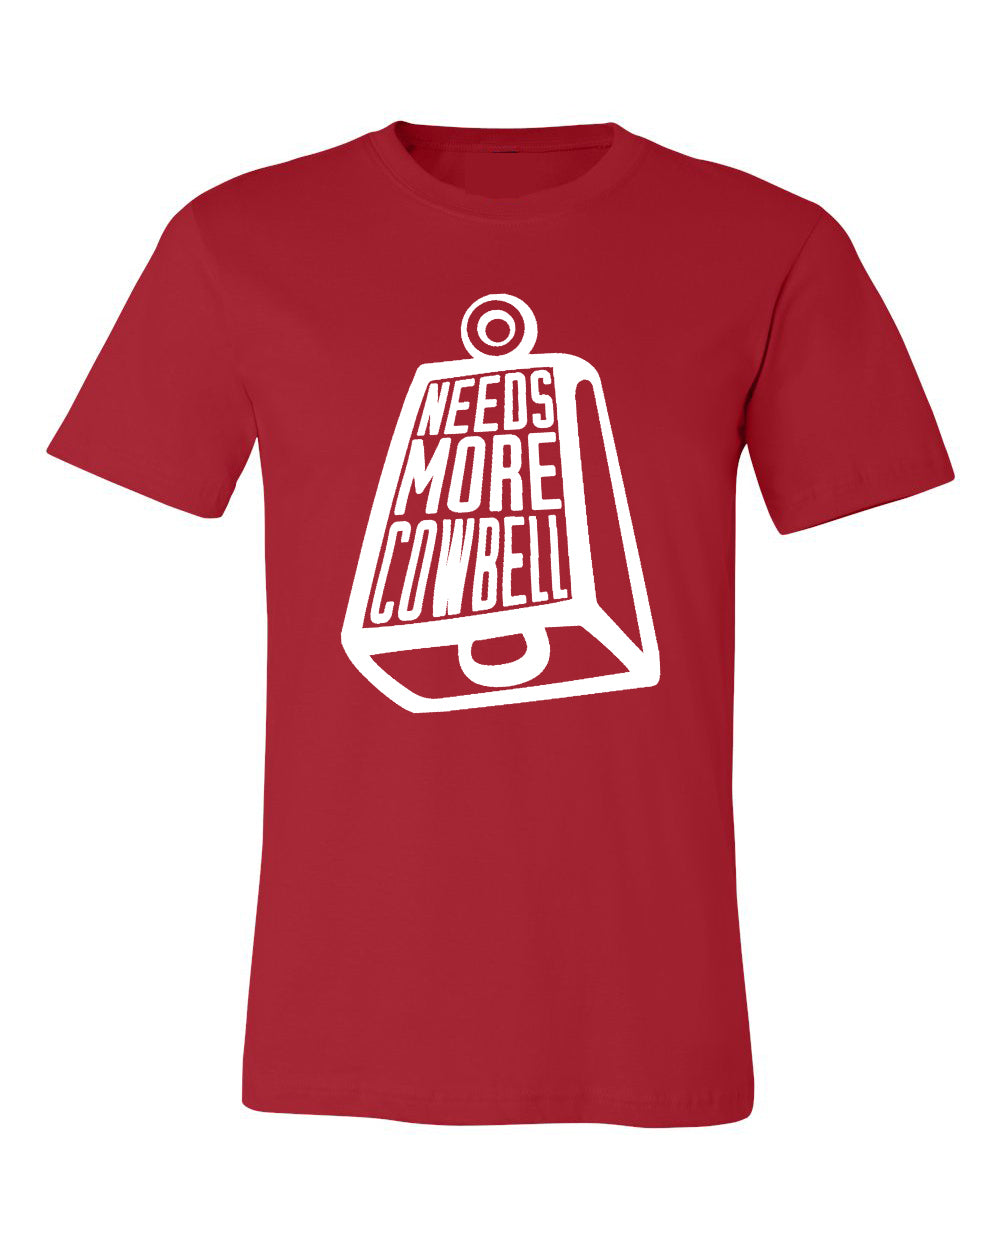 Needs More Cowbell - Tshirt